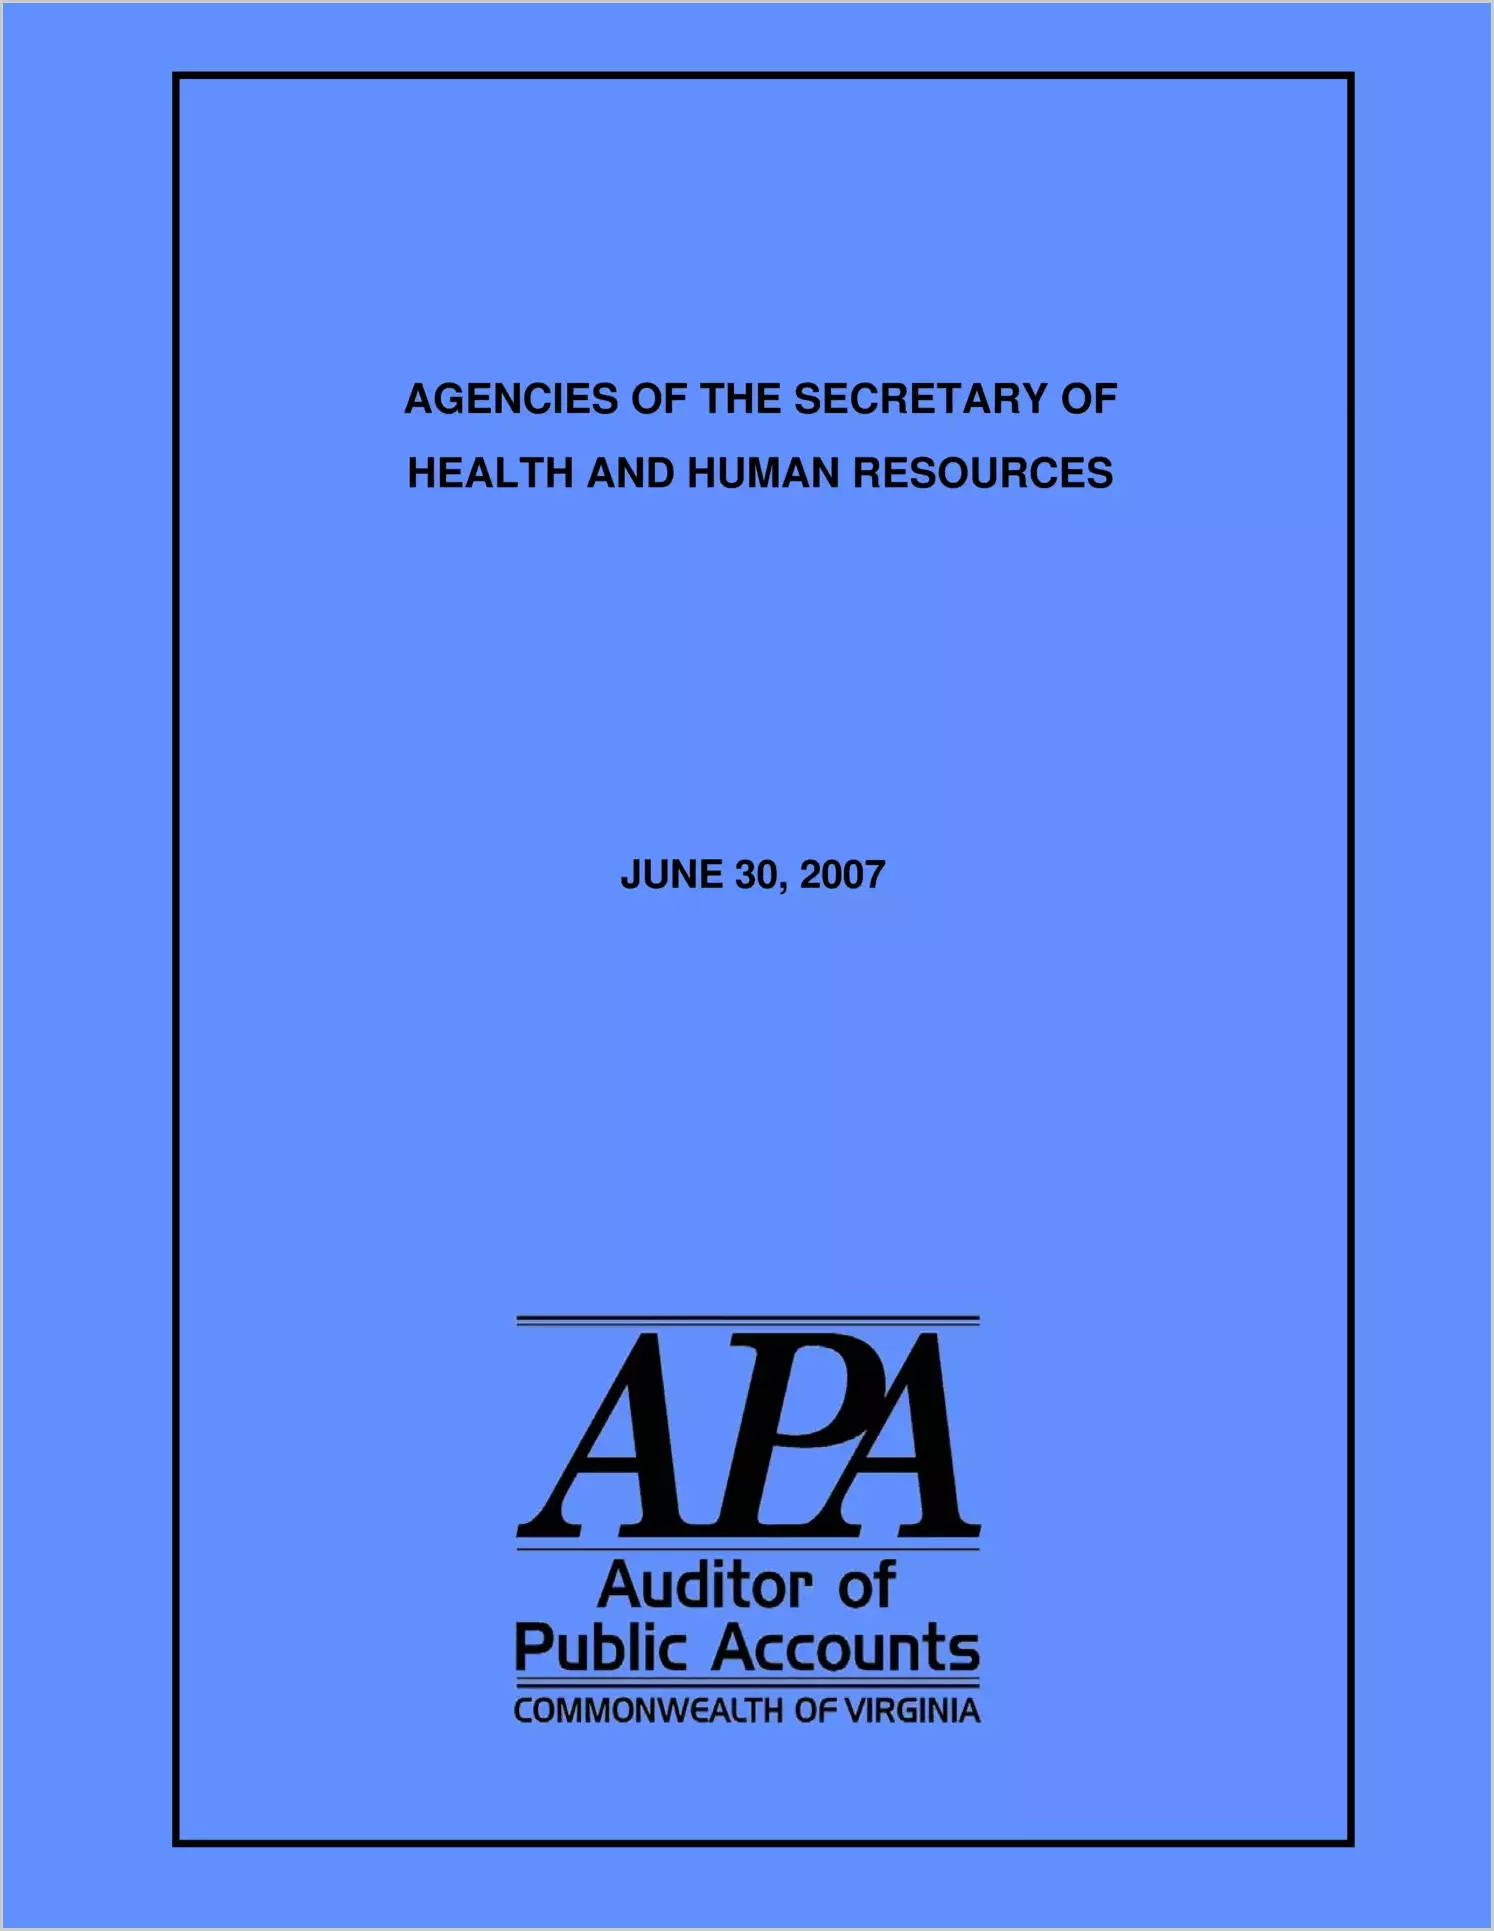 Agencies of the Secretary of Health and Human Resources - June 30, 2007